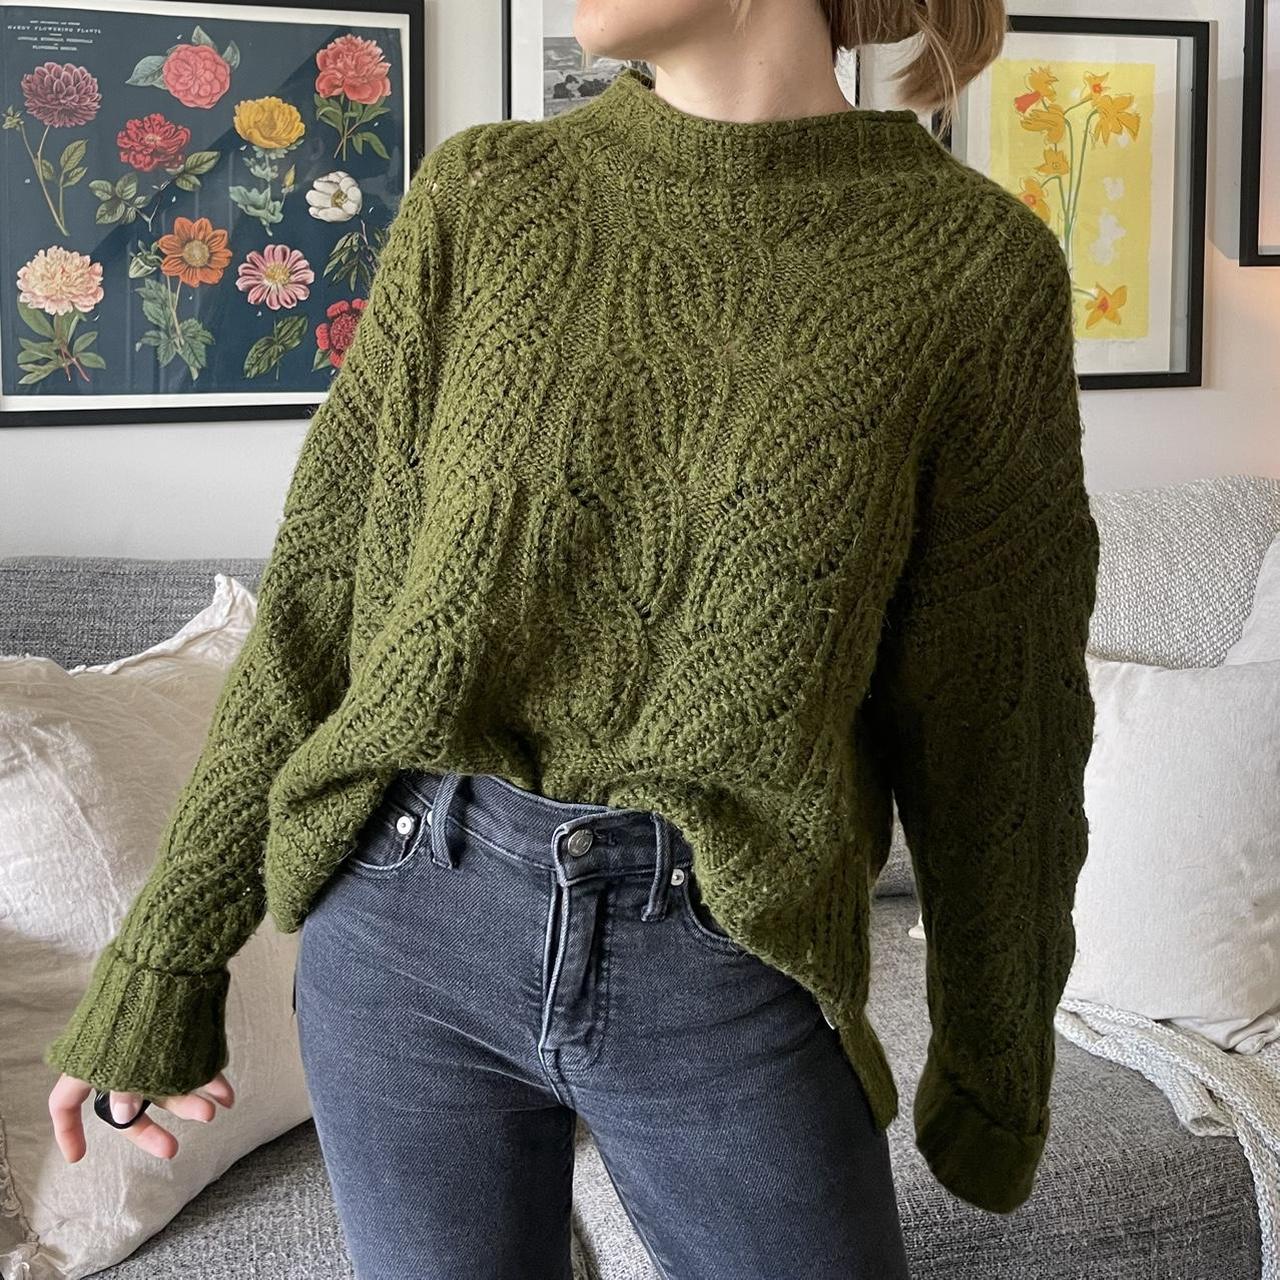 Forest / moss green sweater ABOUT This knit sweater... - Depop